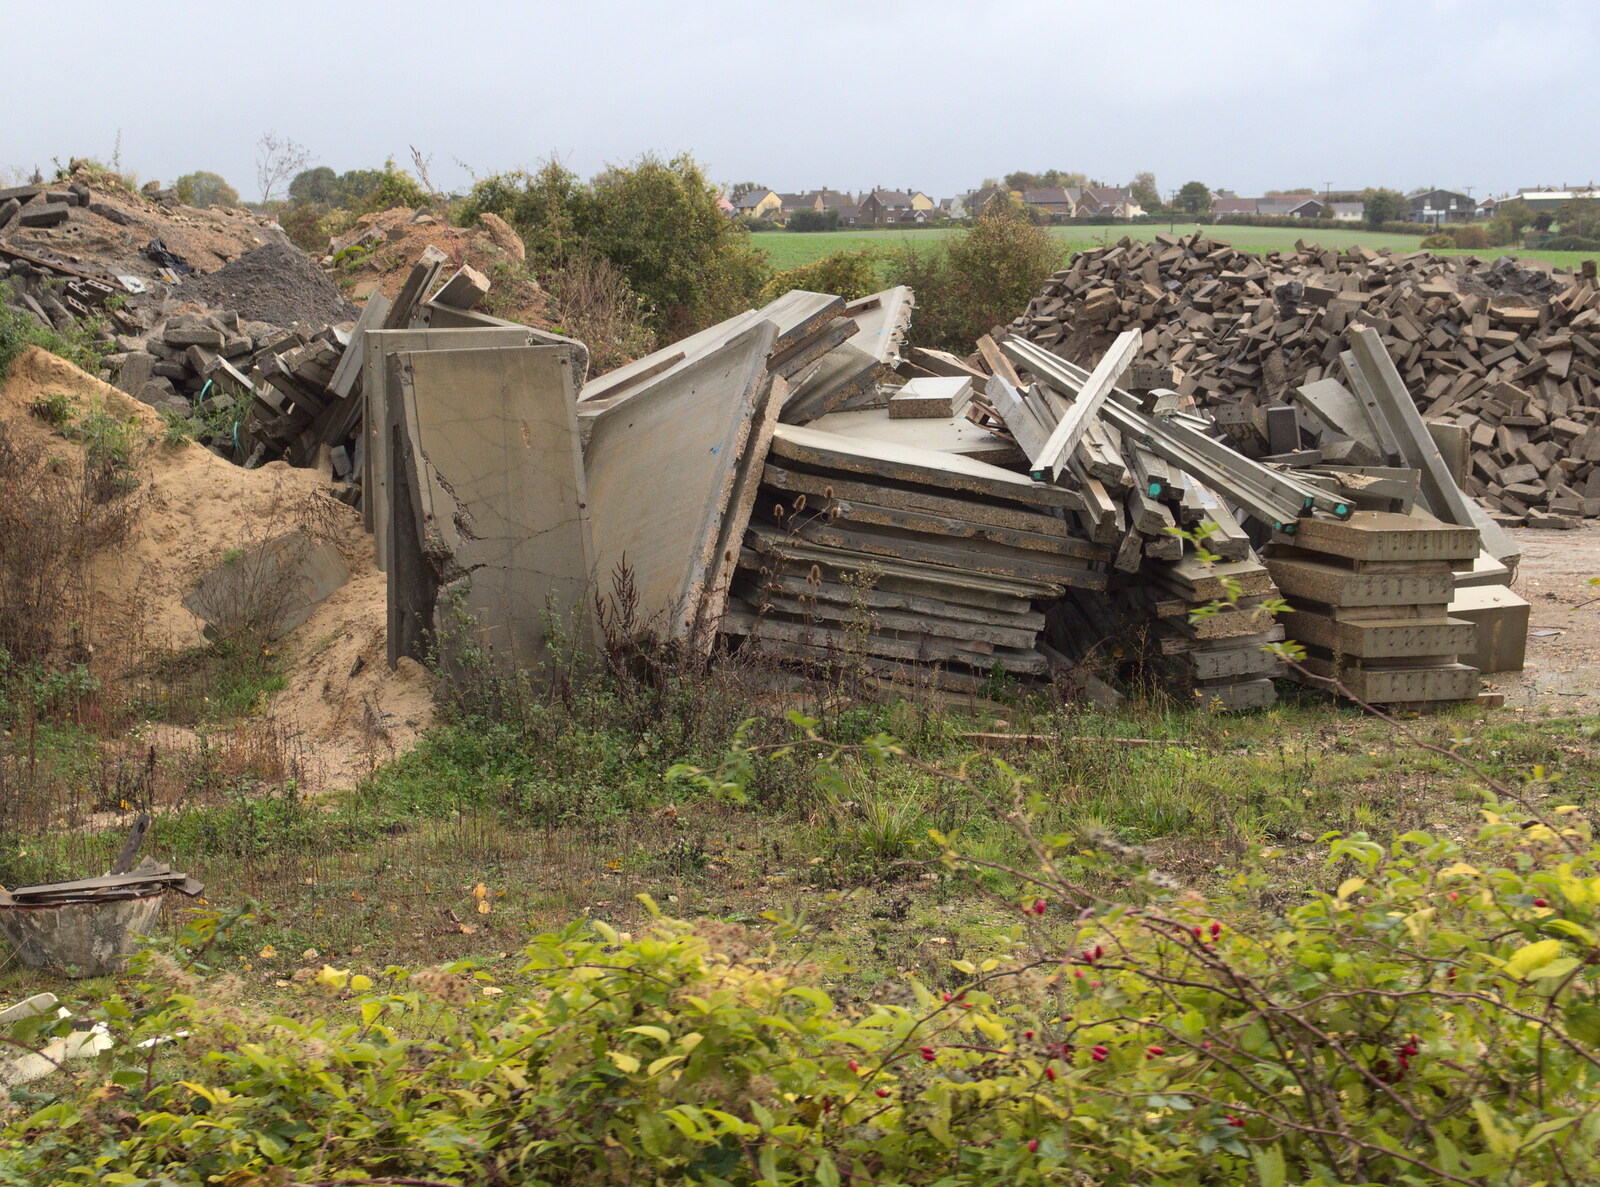 A big pile of junked concrete from (Very) Long Train (Not) Running, Stowmarket, Suffolk - 21st October 2014